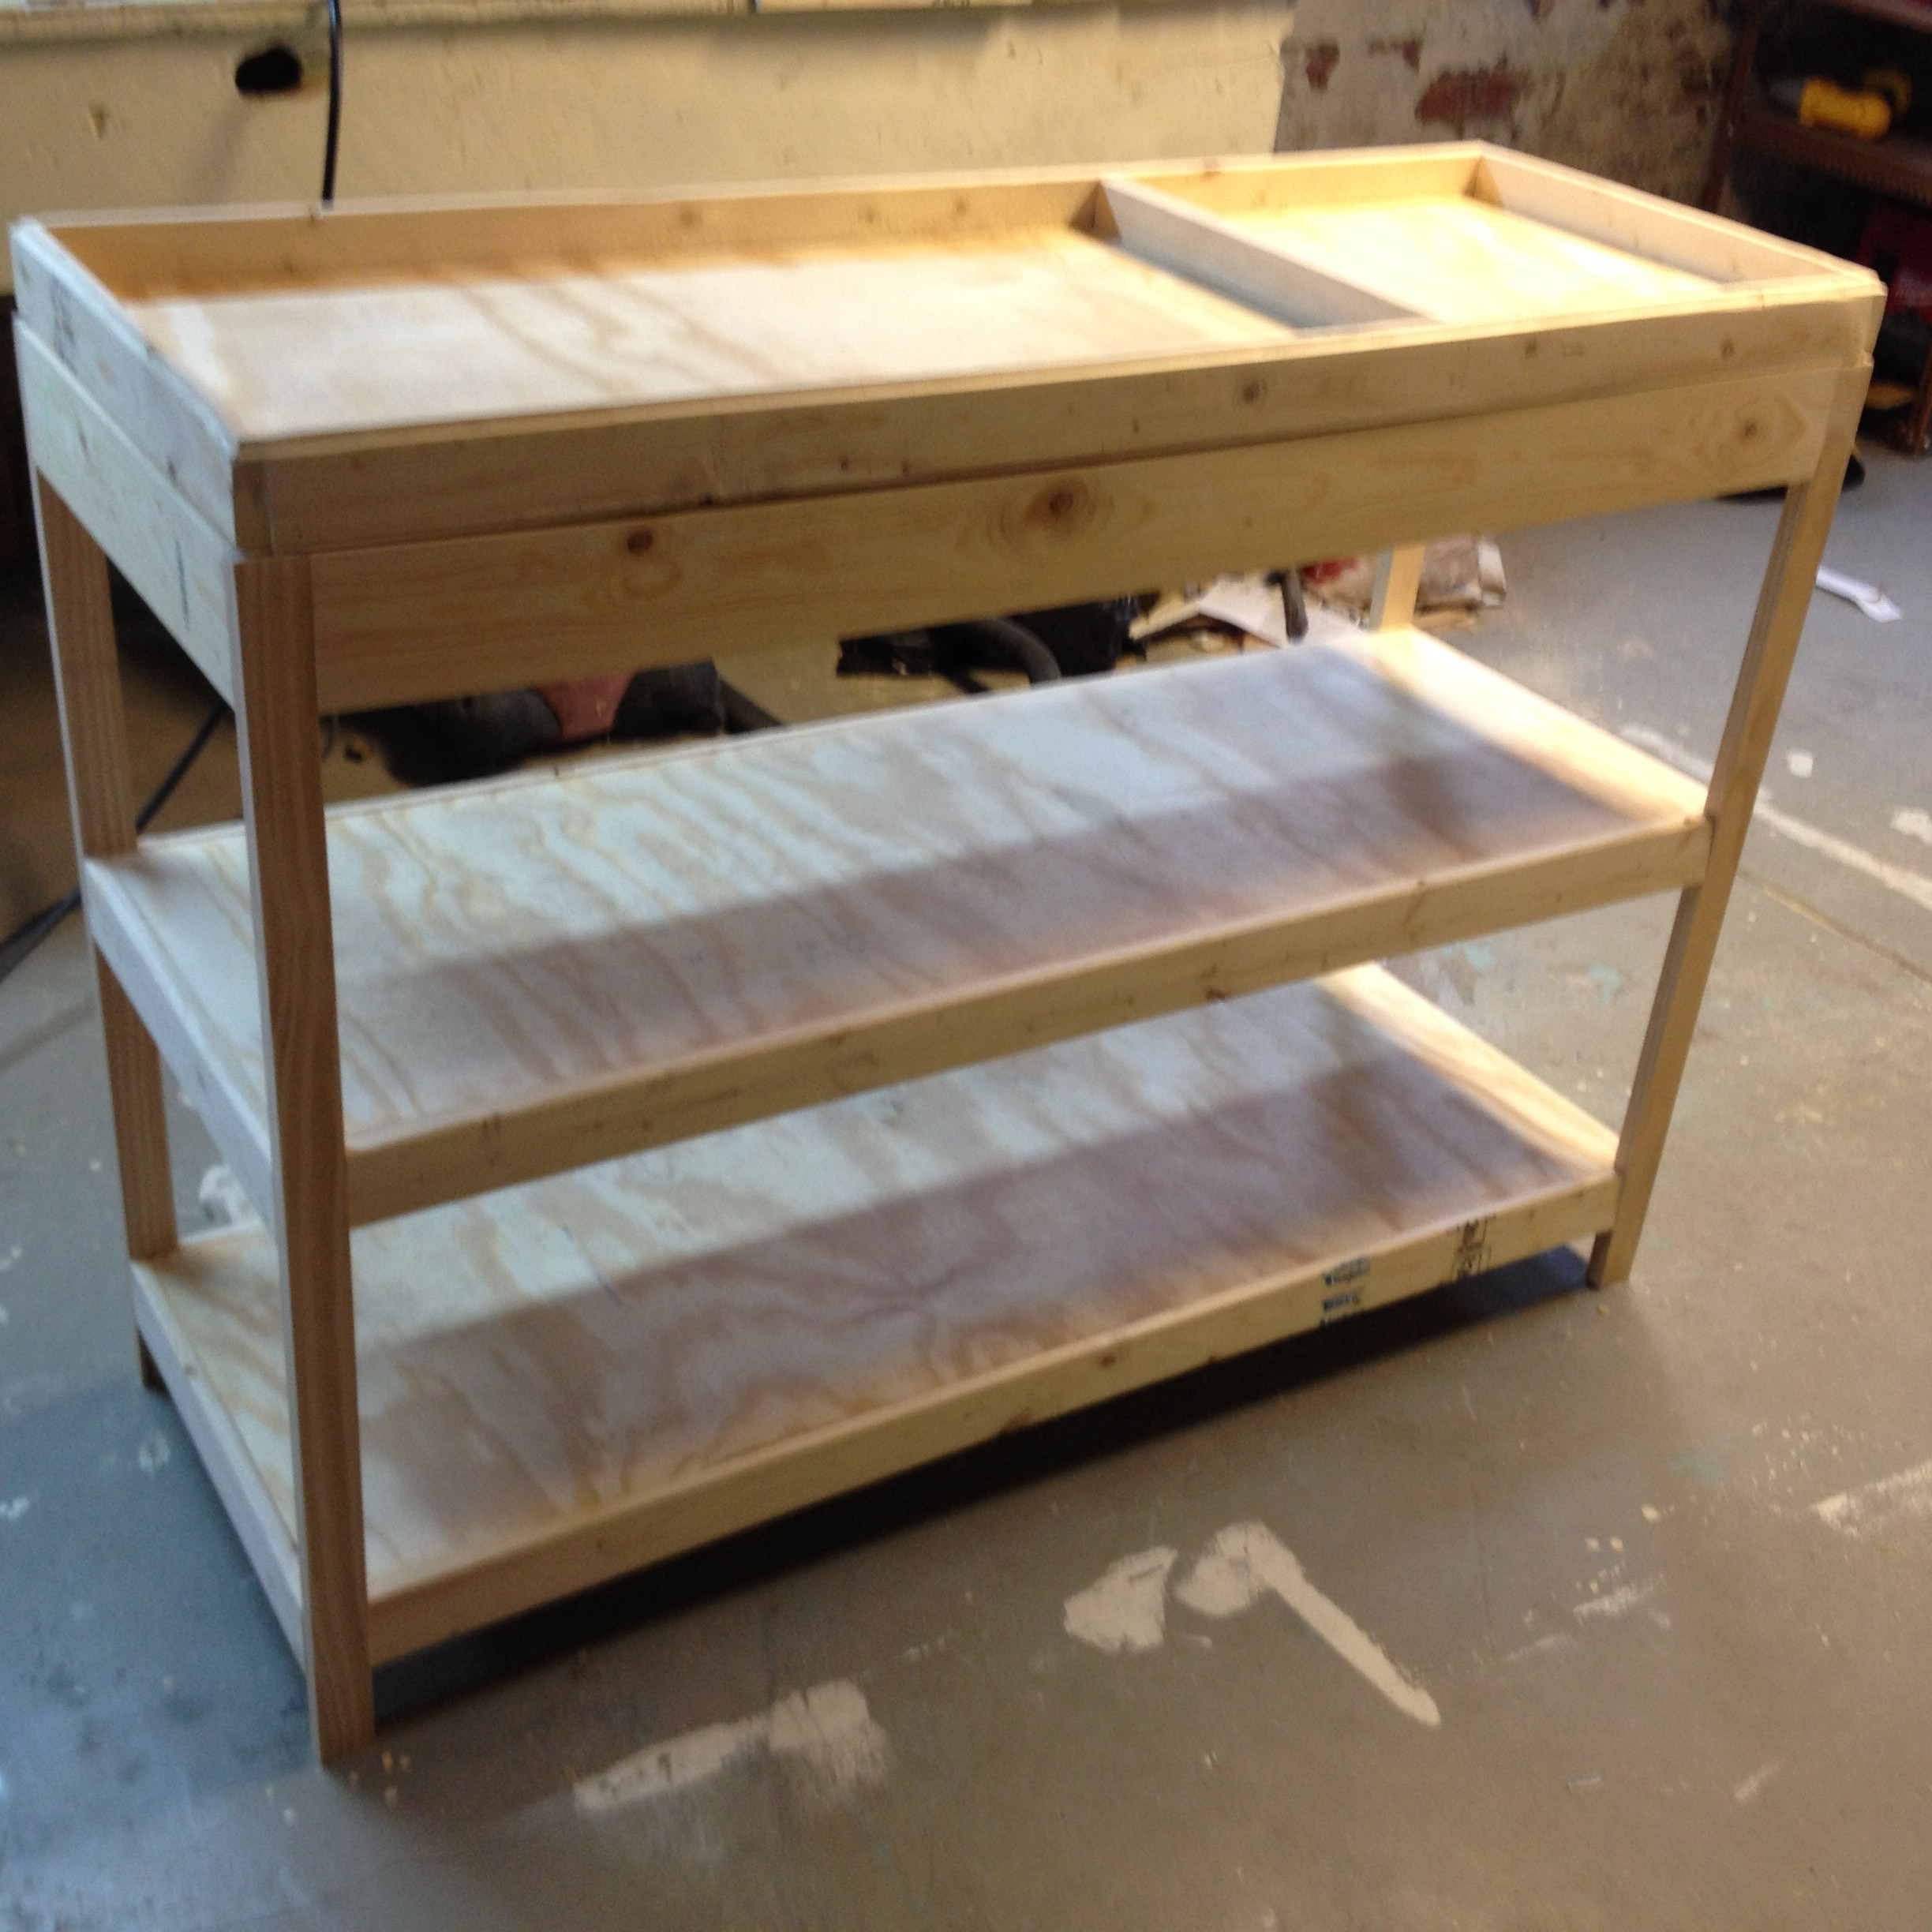 DIY Baby Change Table
 Building a Changing Table – Frugal Living